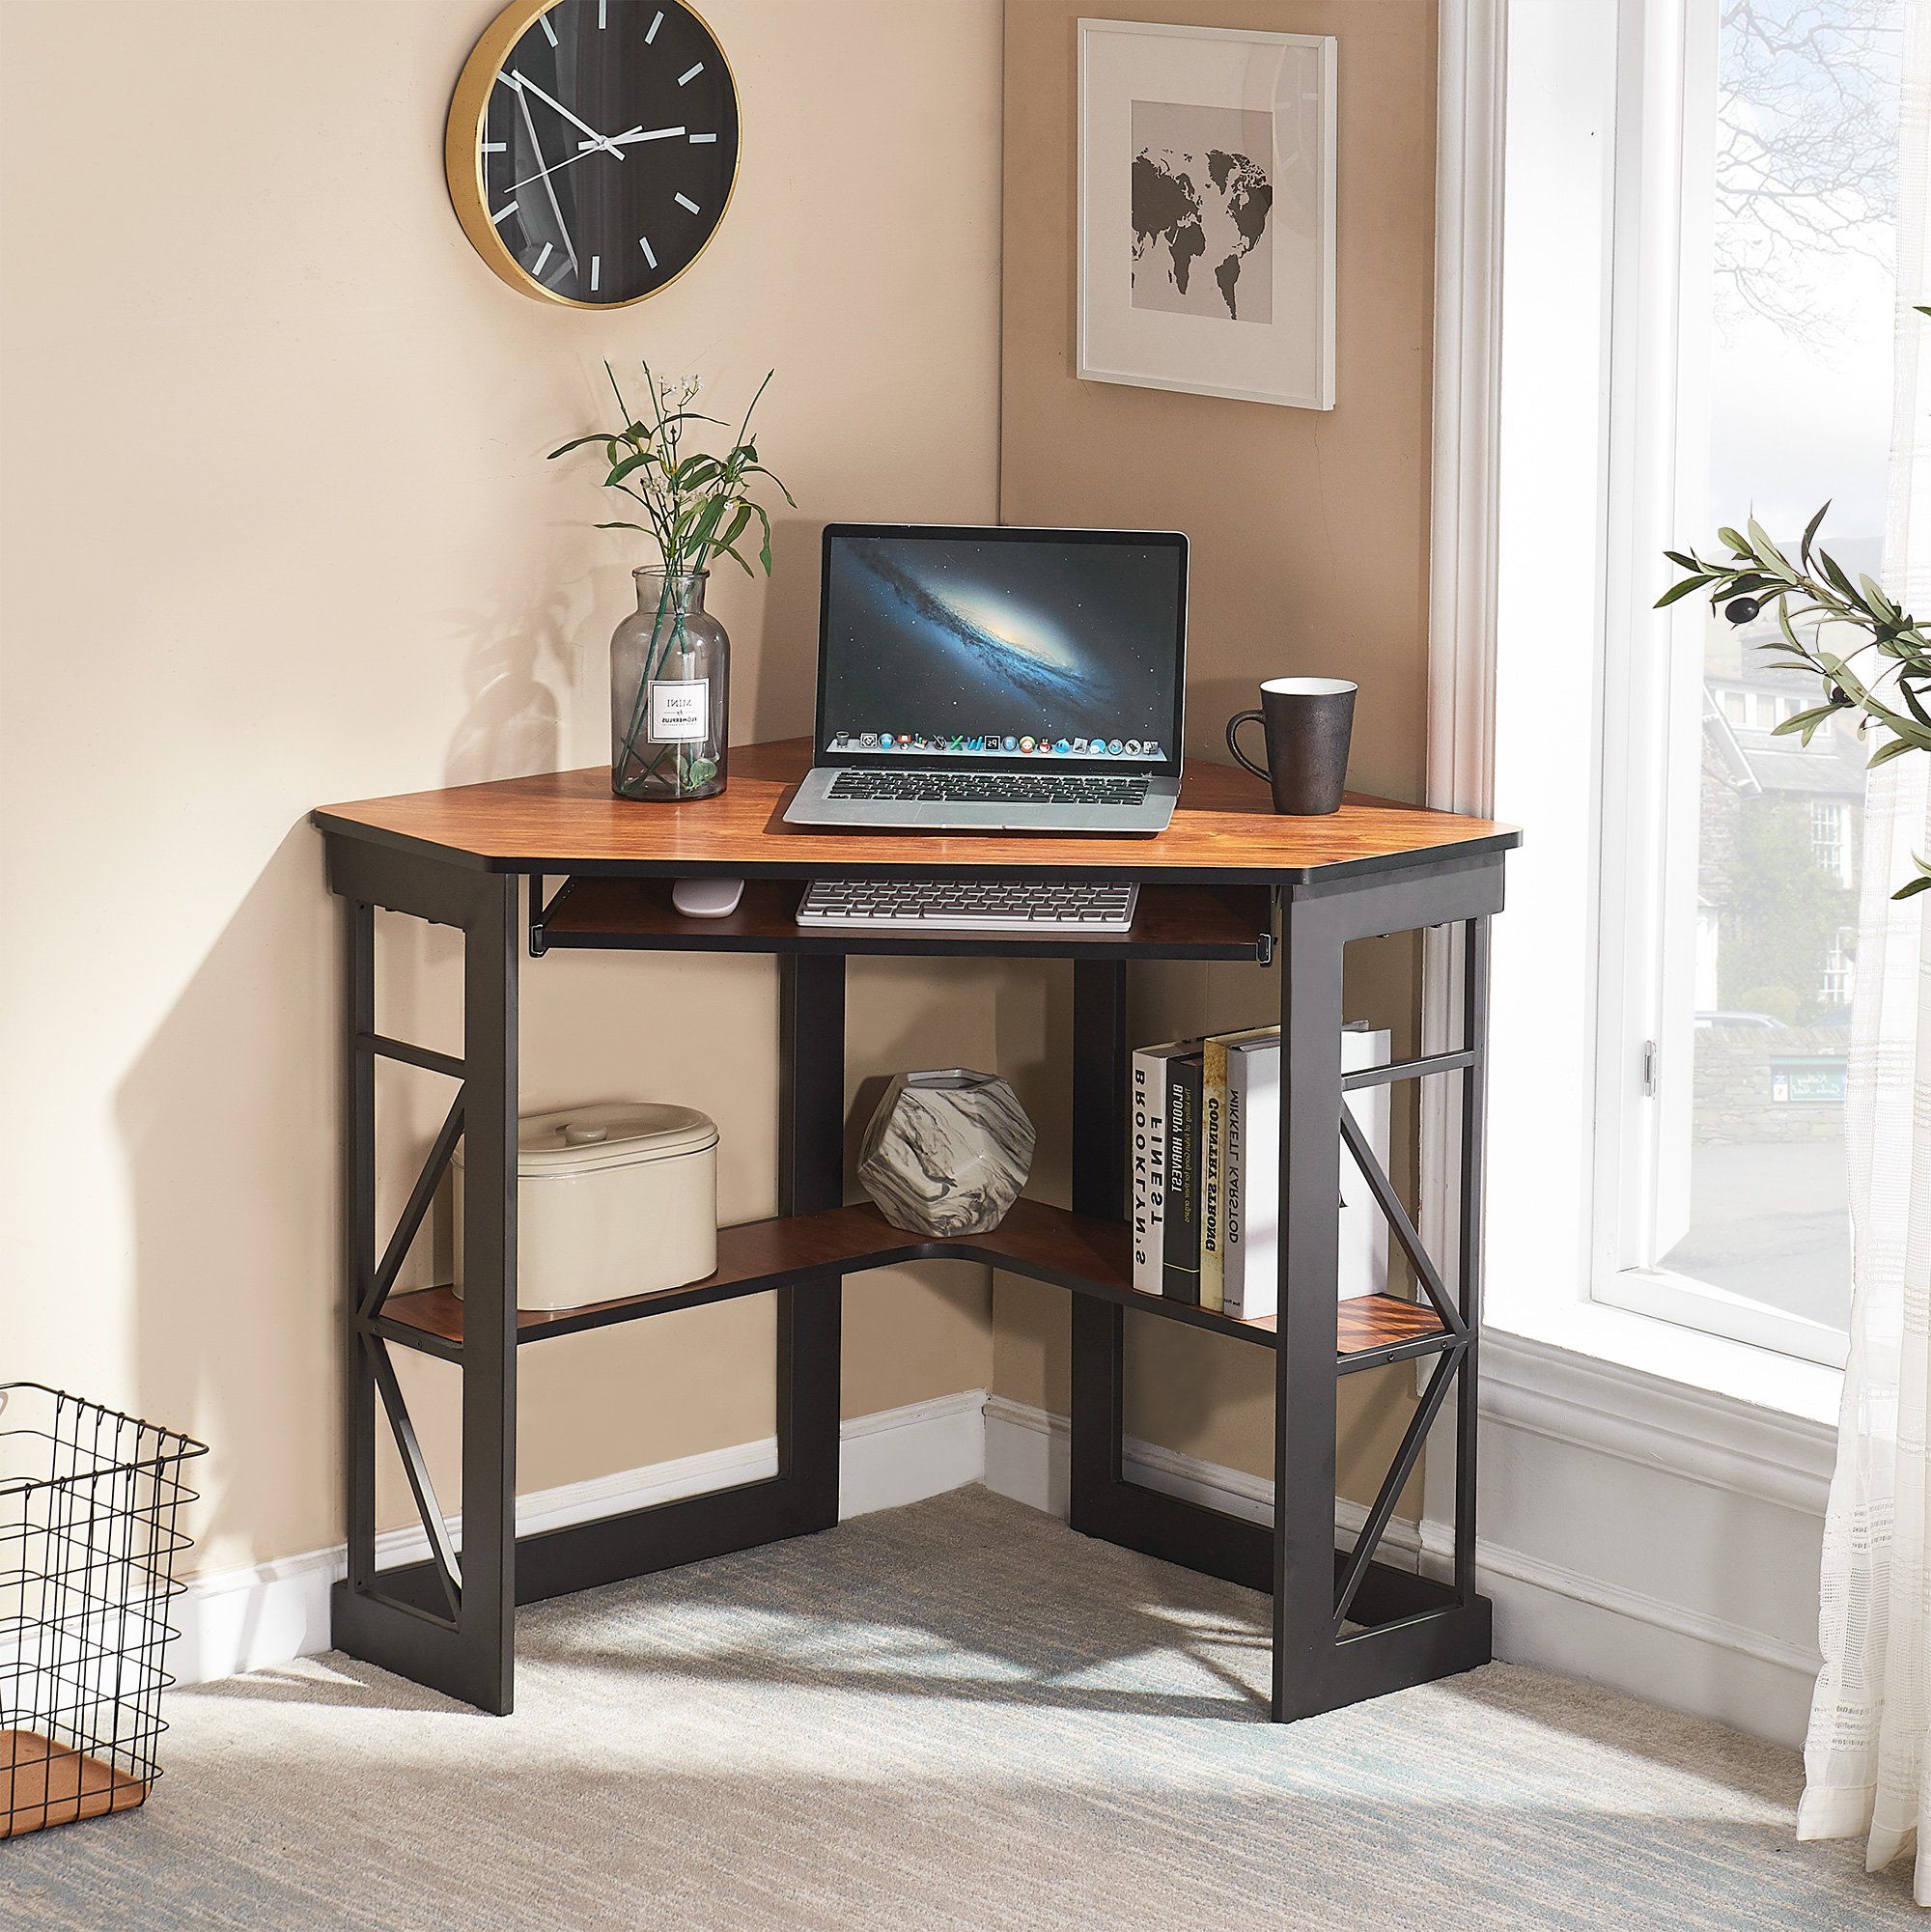 Preferred Vecelo Corner Computer Desk With Keyboard Tray And Storage Shelf Inside Brown And Yellow Corner Desks (View 1 of 15)